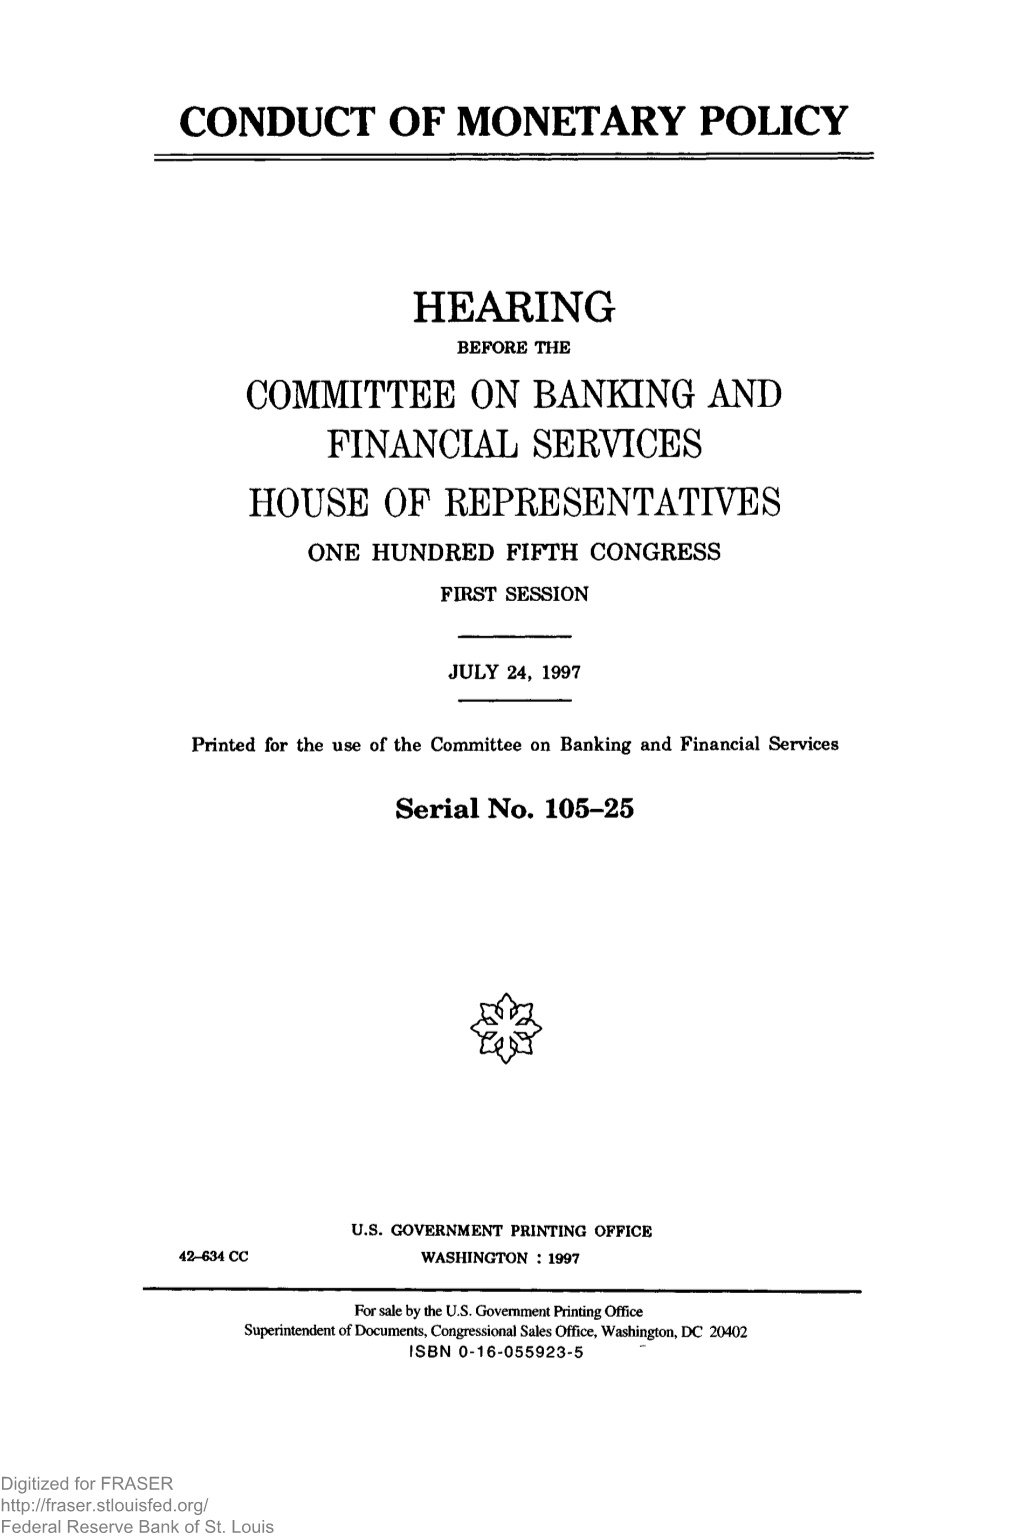 Conduct of Monetary Policy, Report of the Federal Reserve Board, July 24